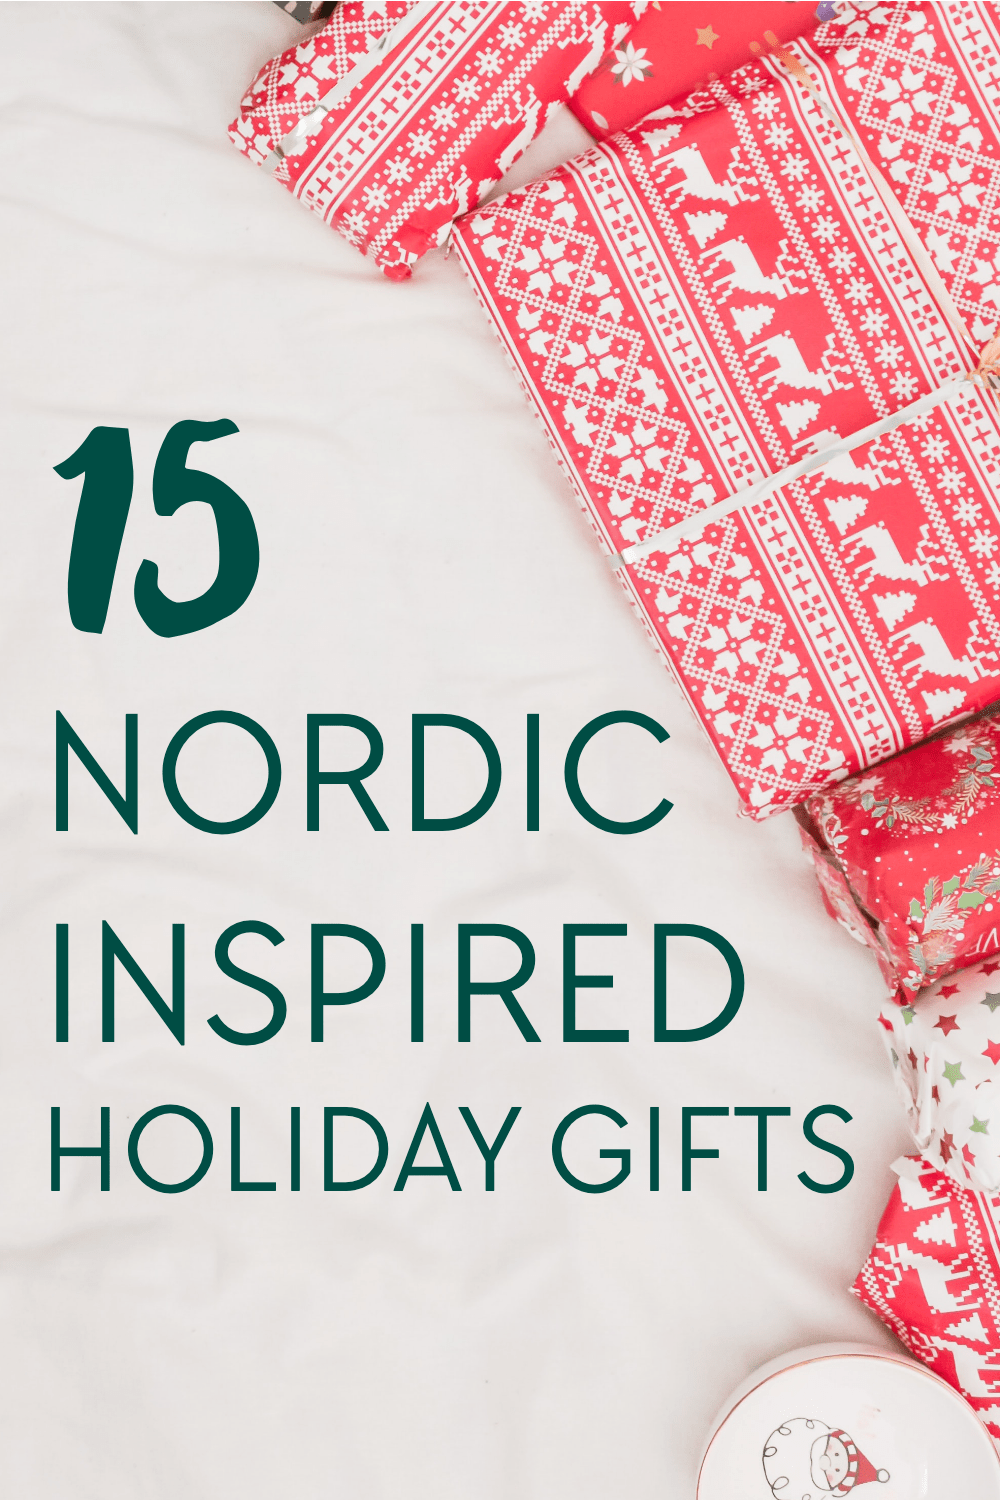 15 Nordic Inspired Holiday Gifts - Heart My Backpack